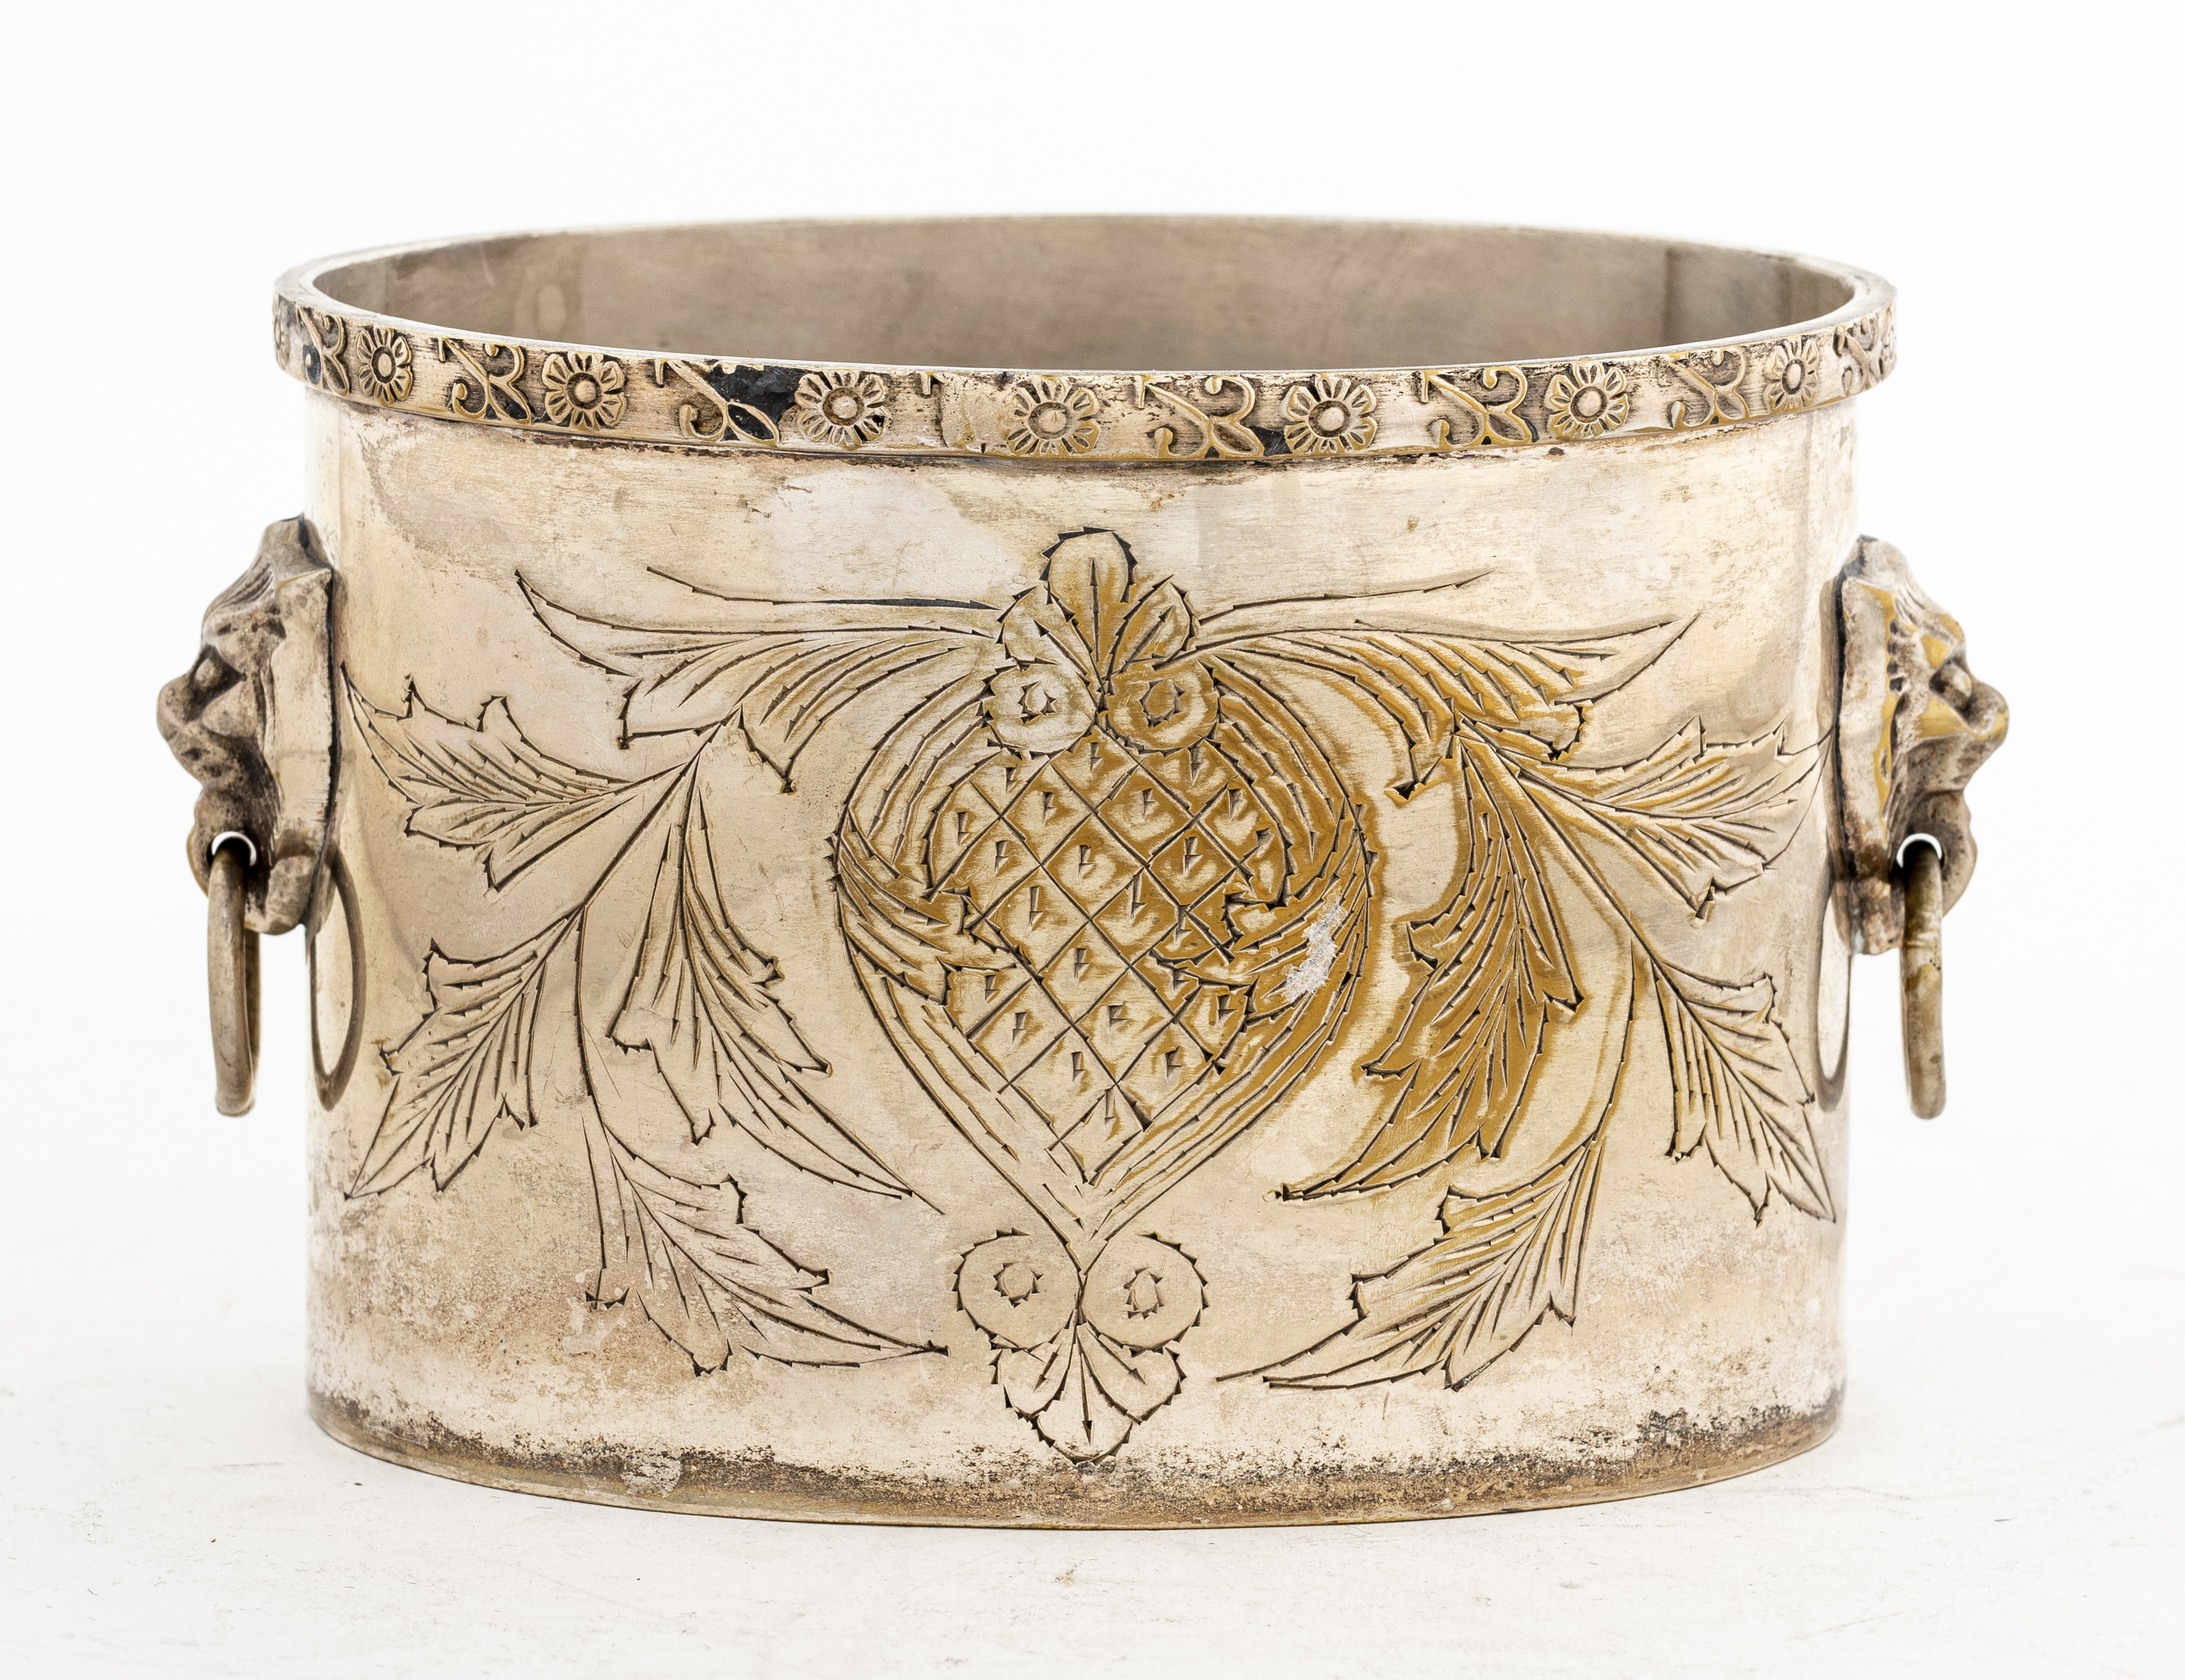 INTERNATIONAL SILVER CO. SILVER-PLATED